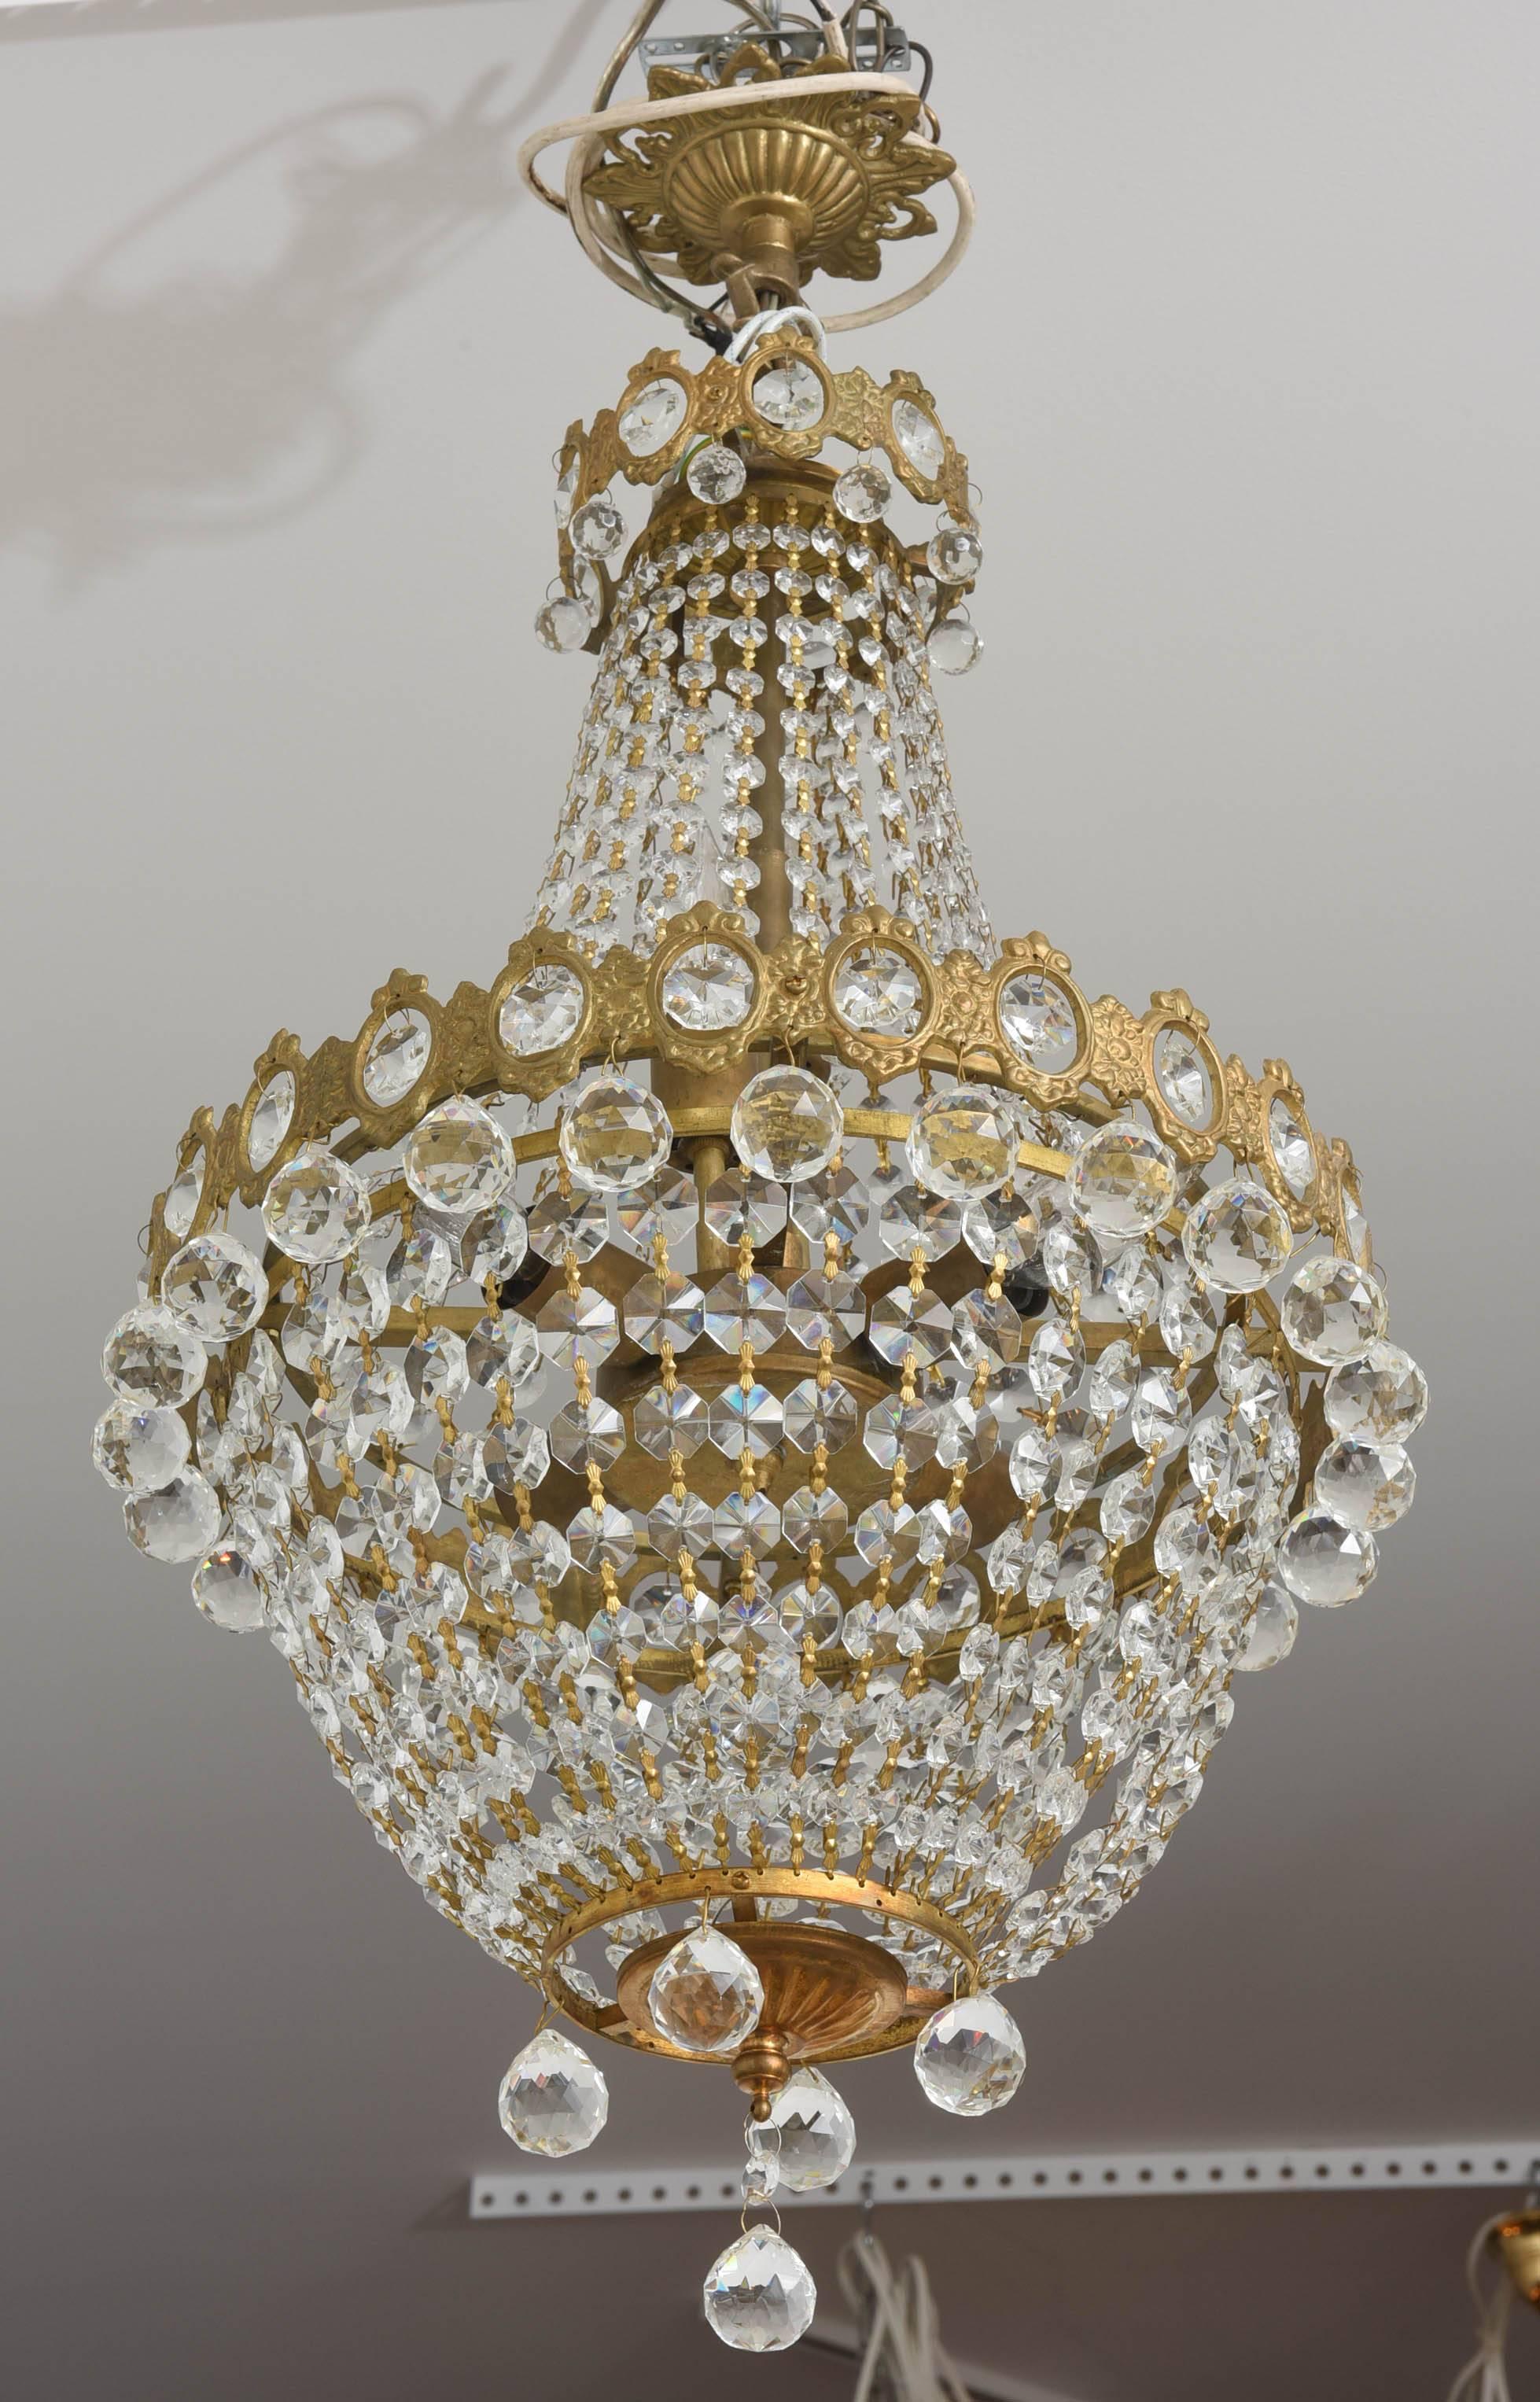 Hollywood Regency, Louis XVI Style Chandelier in Antique Brass and Crystals 2